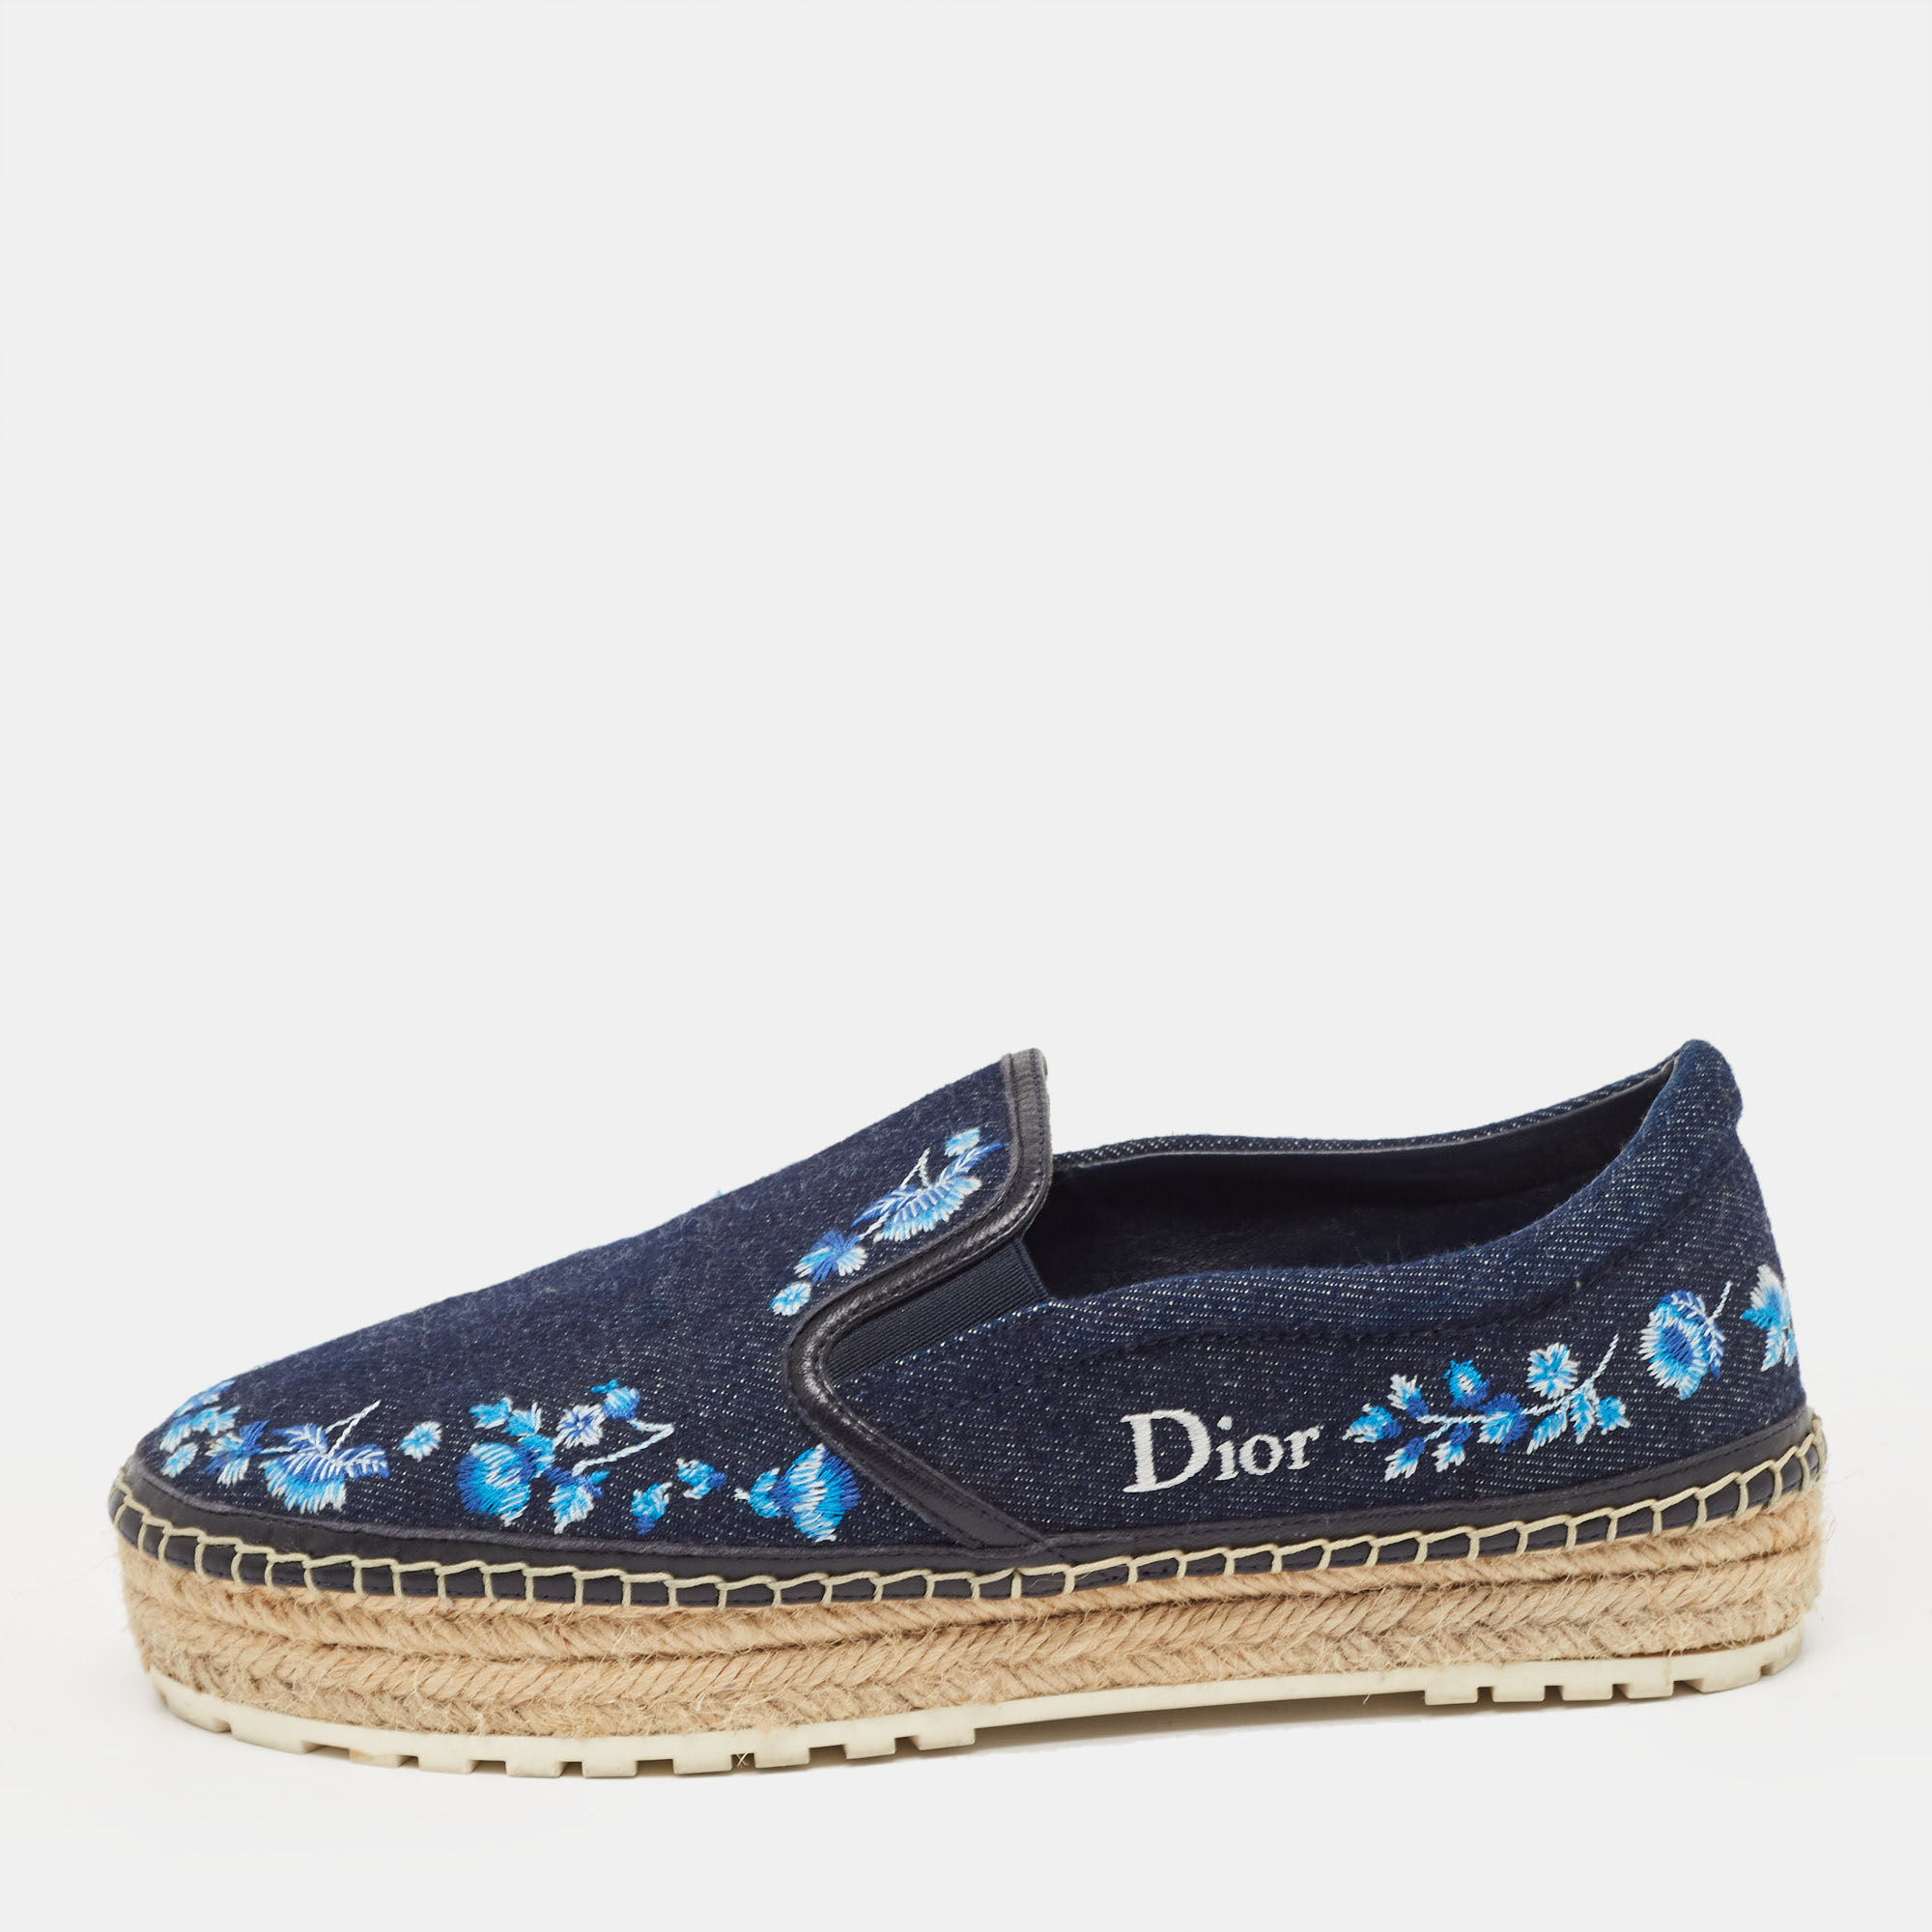 Pre-owned Dior Blue Denim Floral Embroidered Espadrille Flats Size 38 In Navy Blue